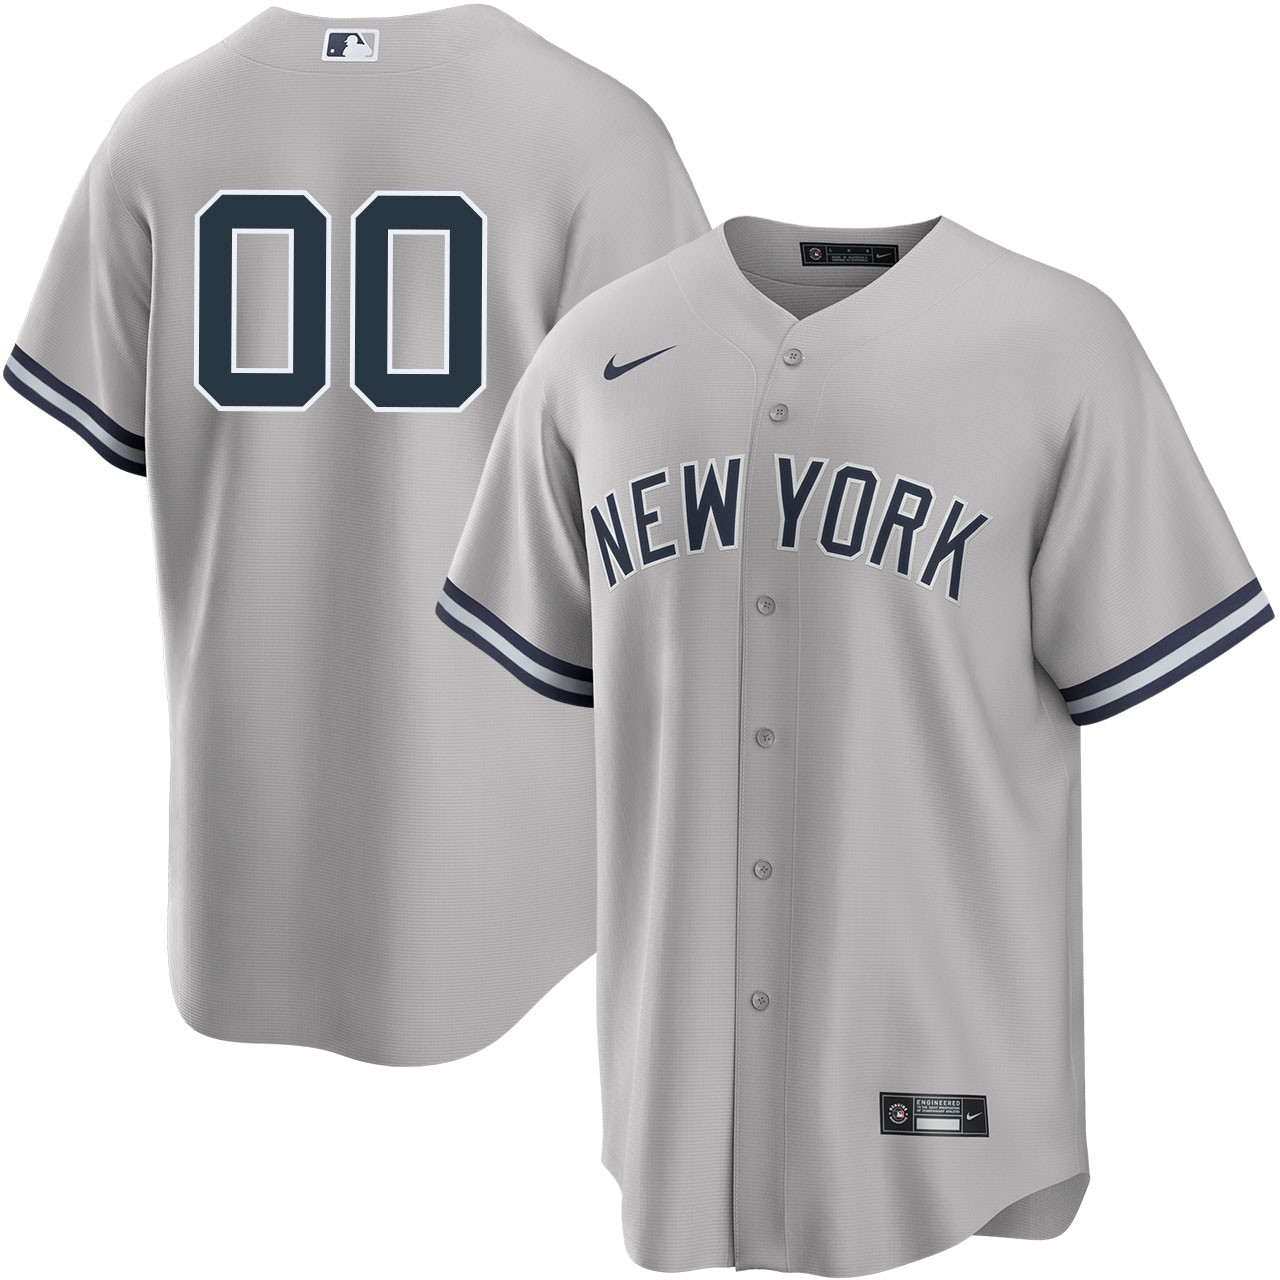 New York Yankees Personalized Road Jersey by Majestic